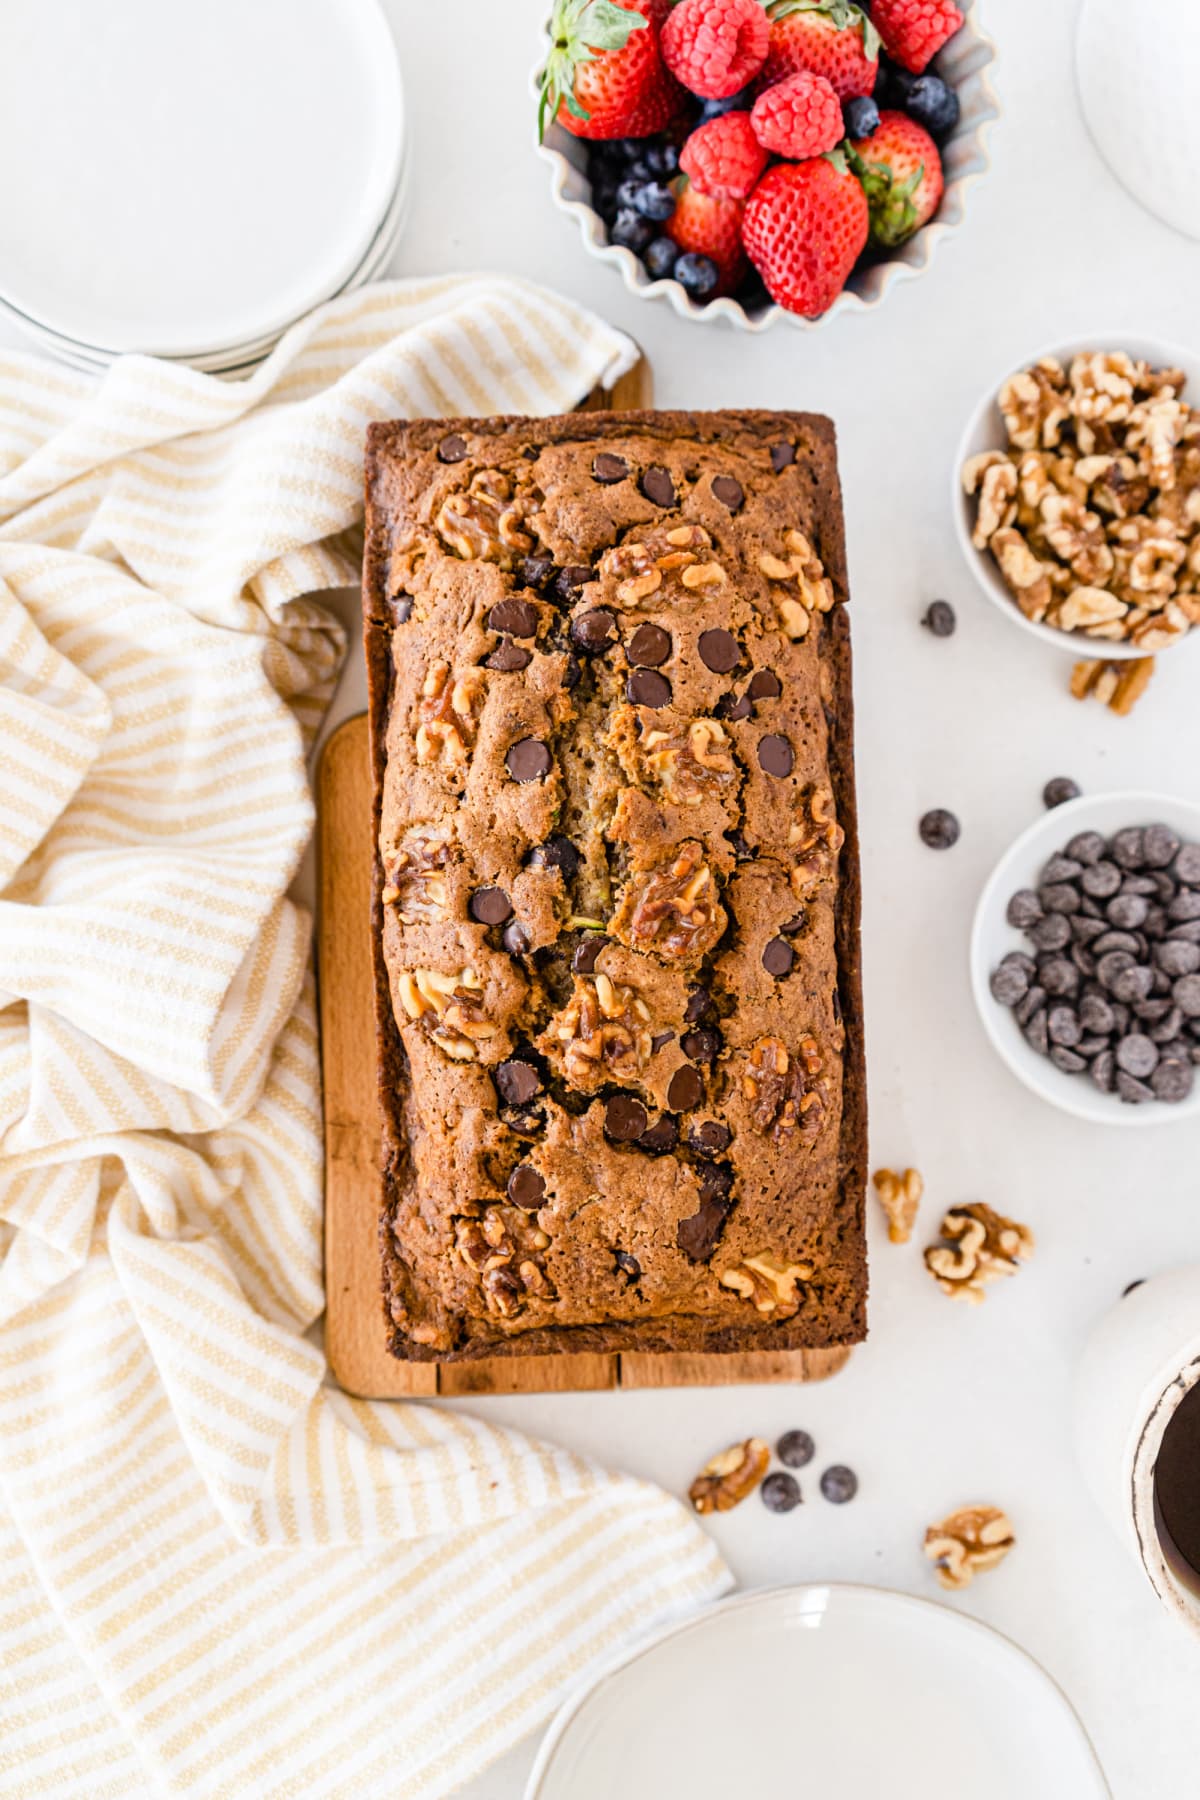 Chocolate chip zucchini bread surrounded by berries, nuts and chips